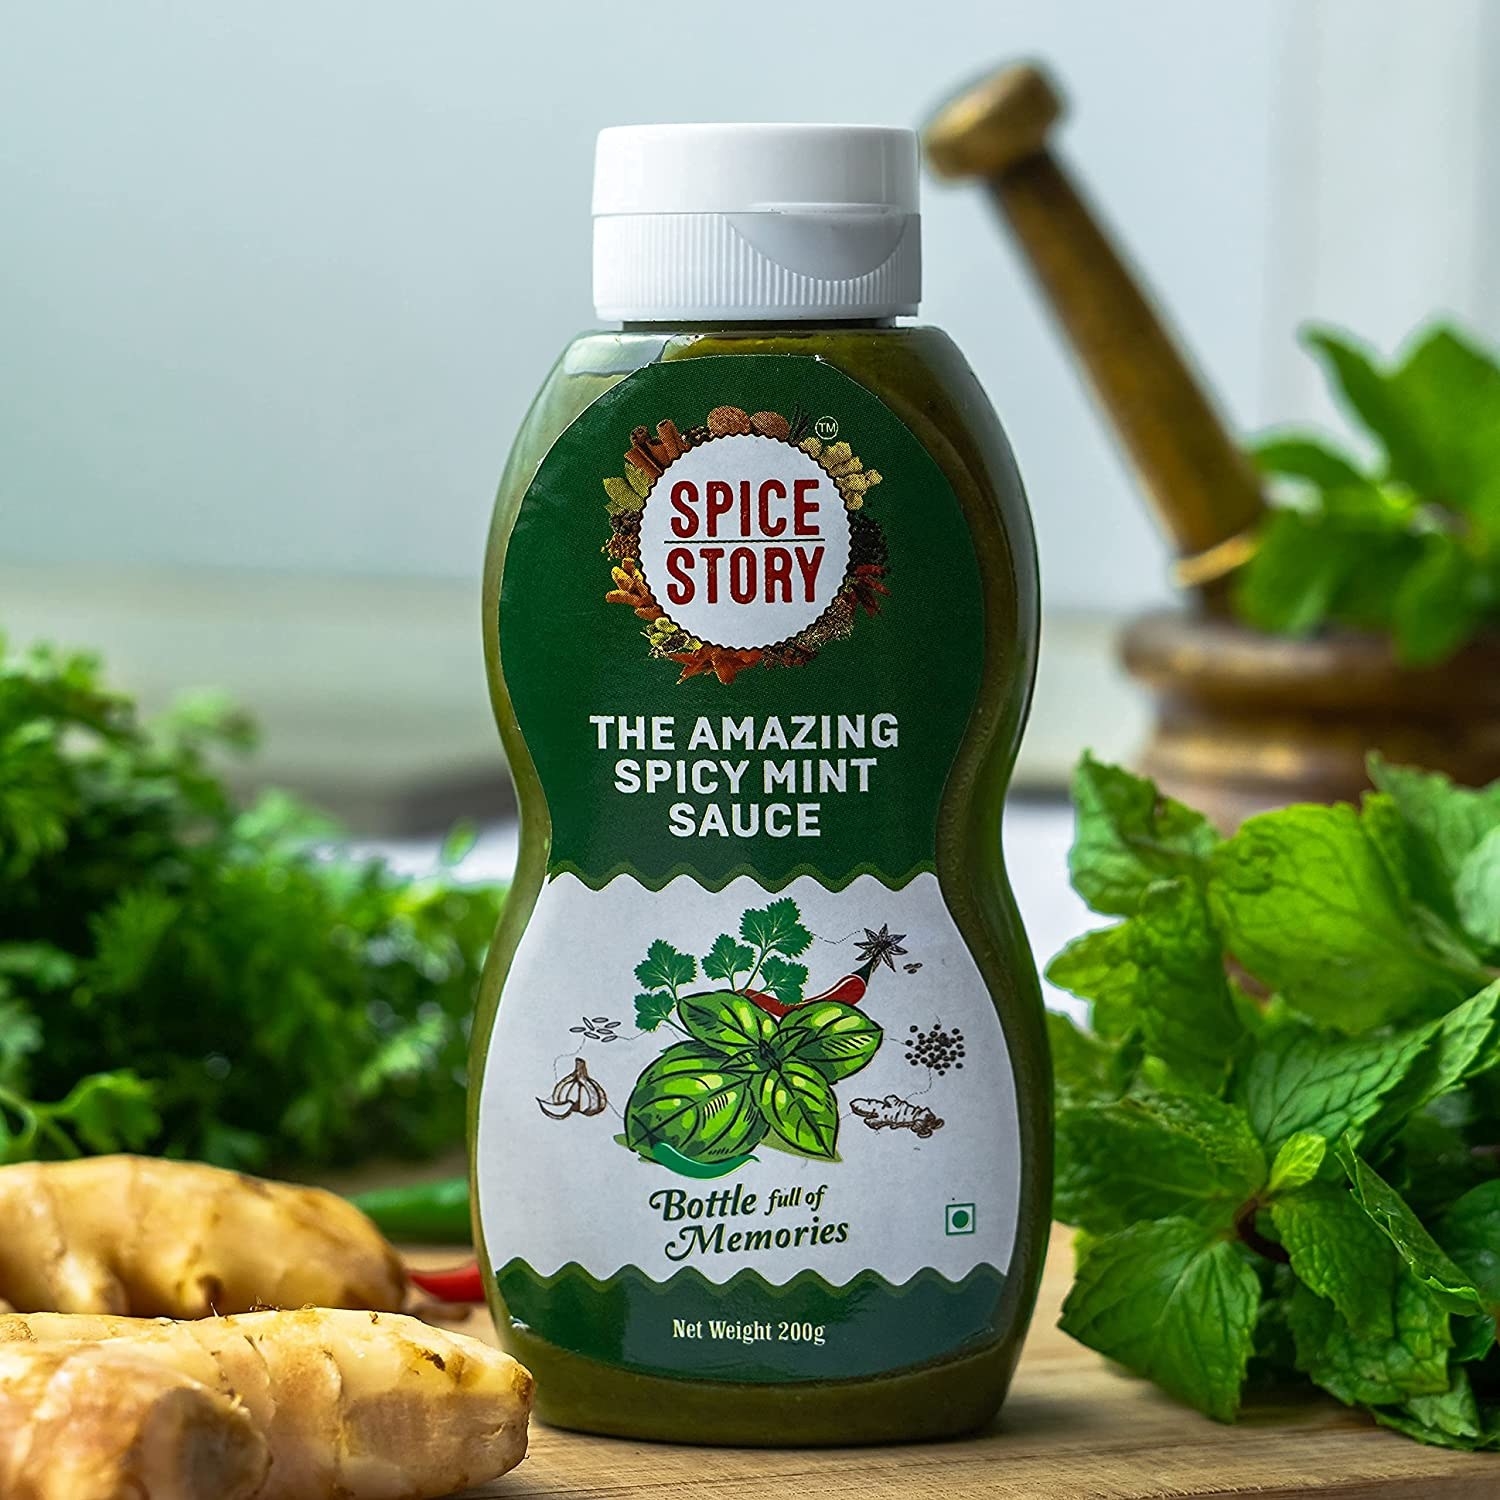 A bottle of the sauce next to herbs and spices